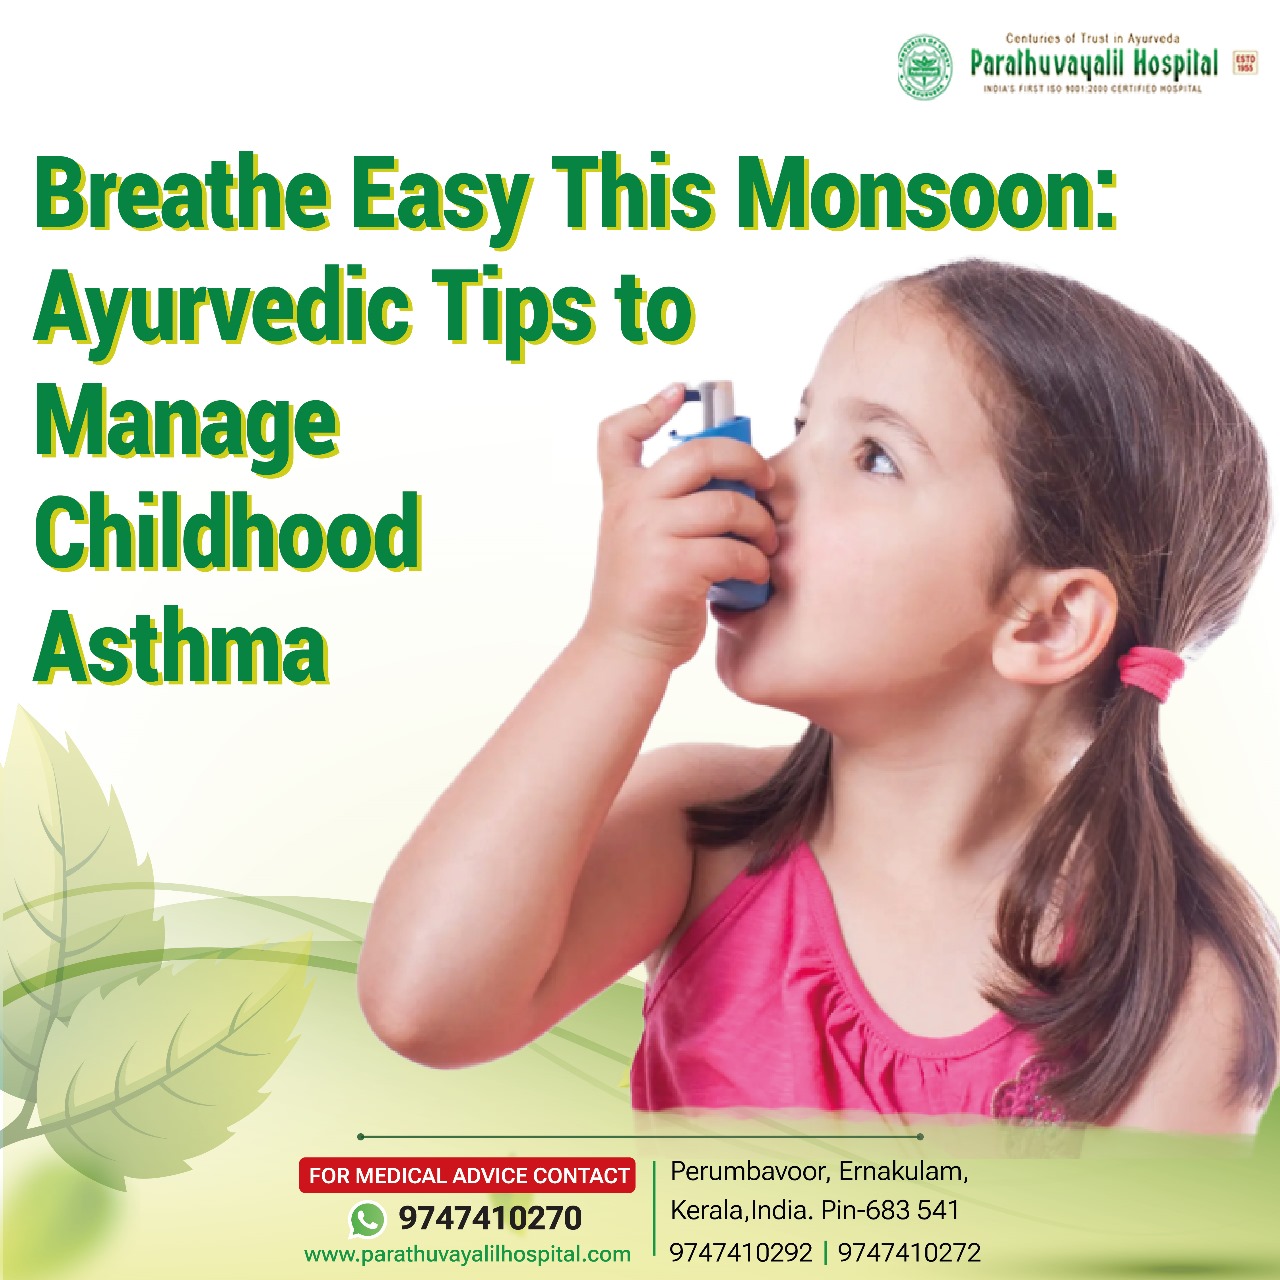 Breathe Easy This Monsoon: Ayurvedic Tips to Manage Childhood Asthma